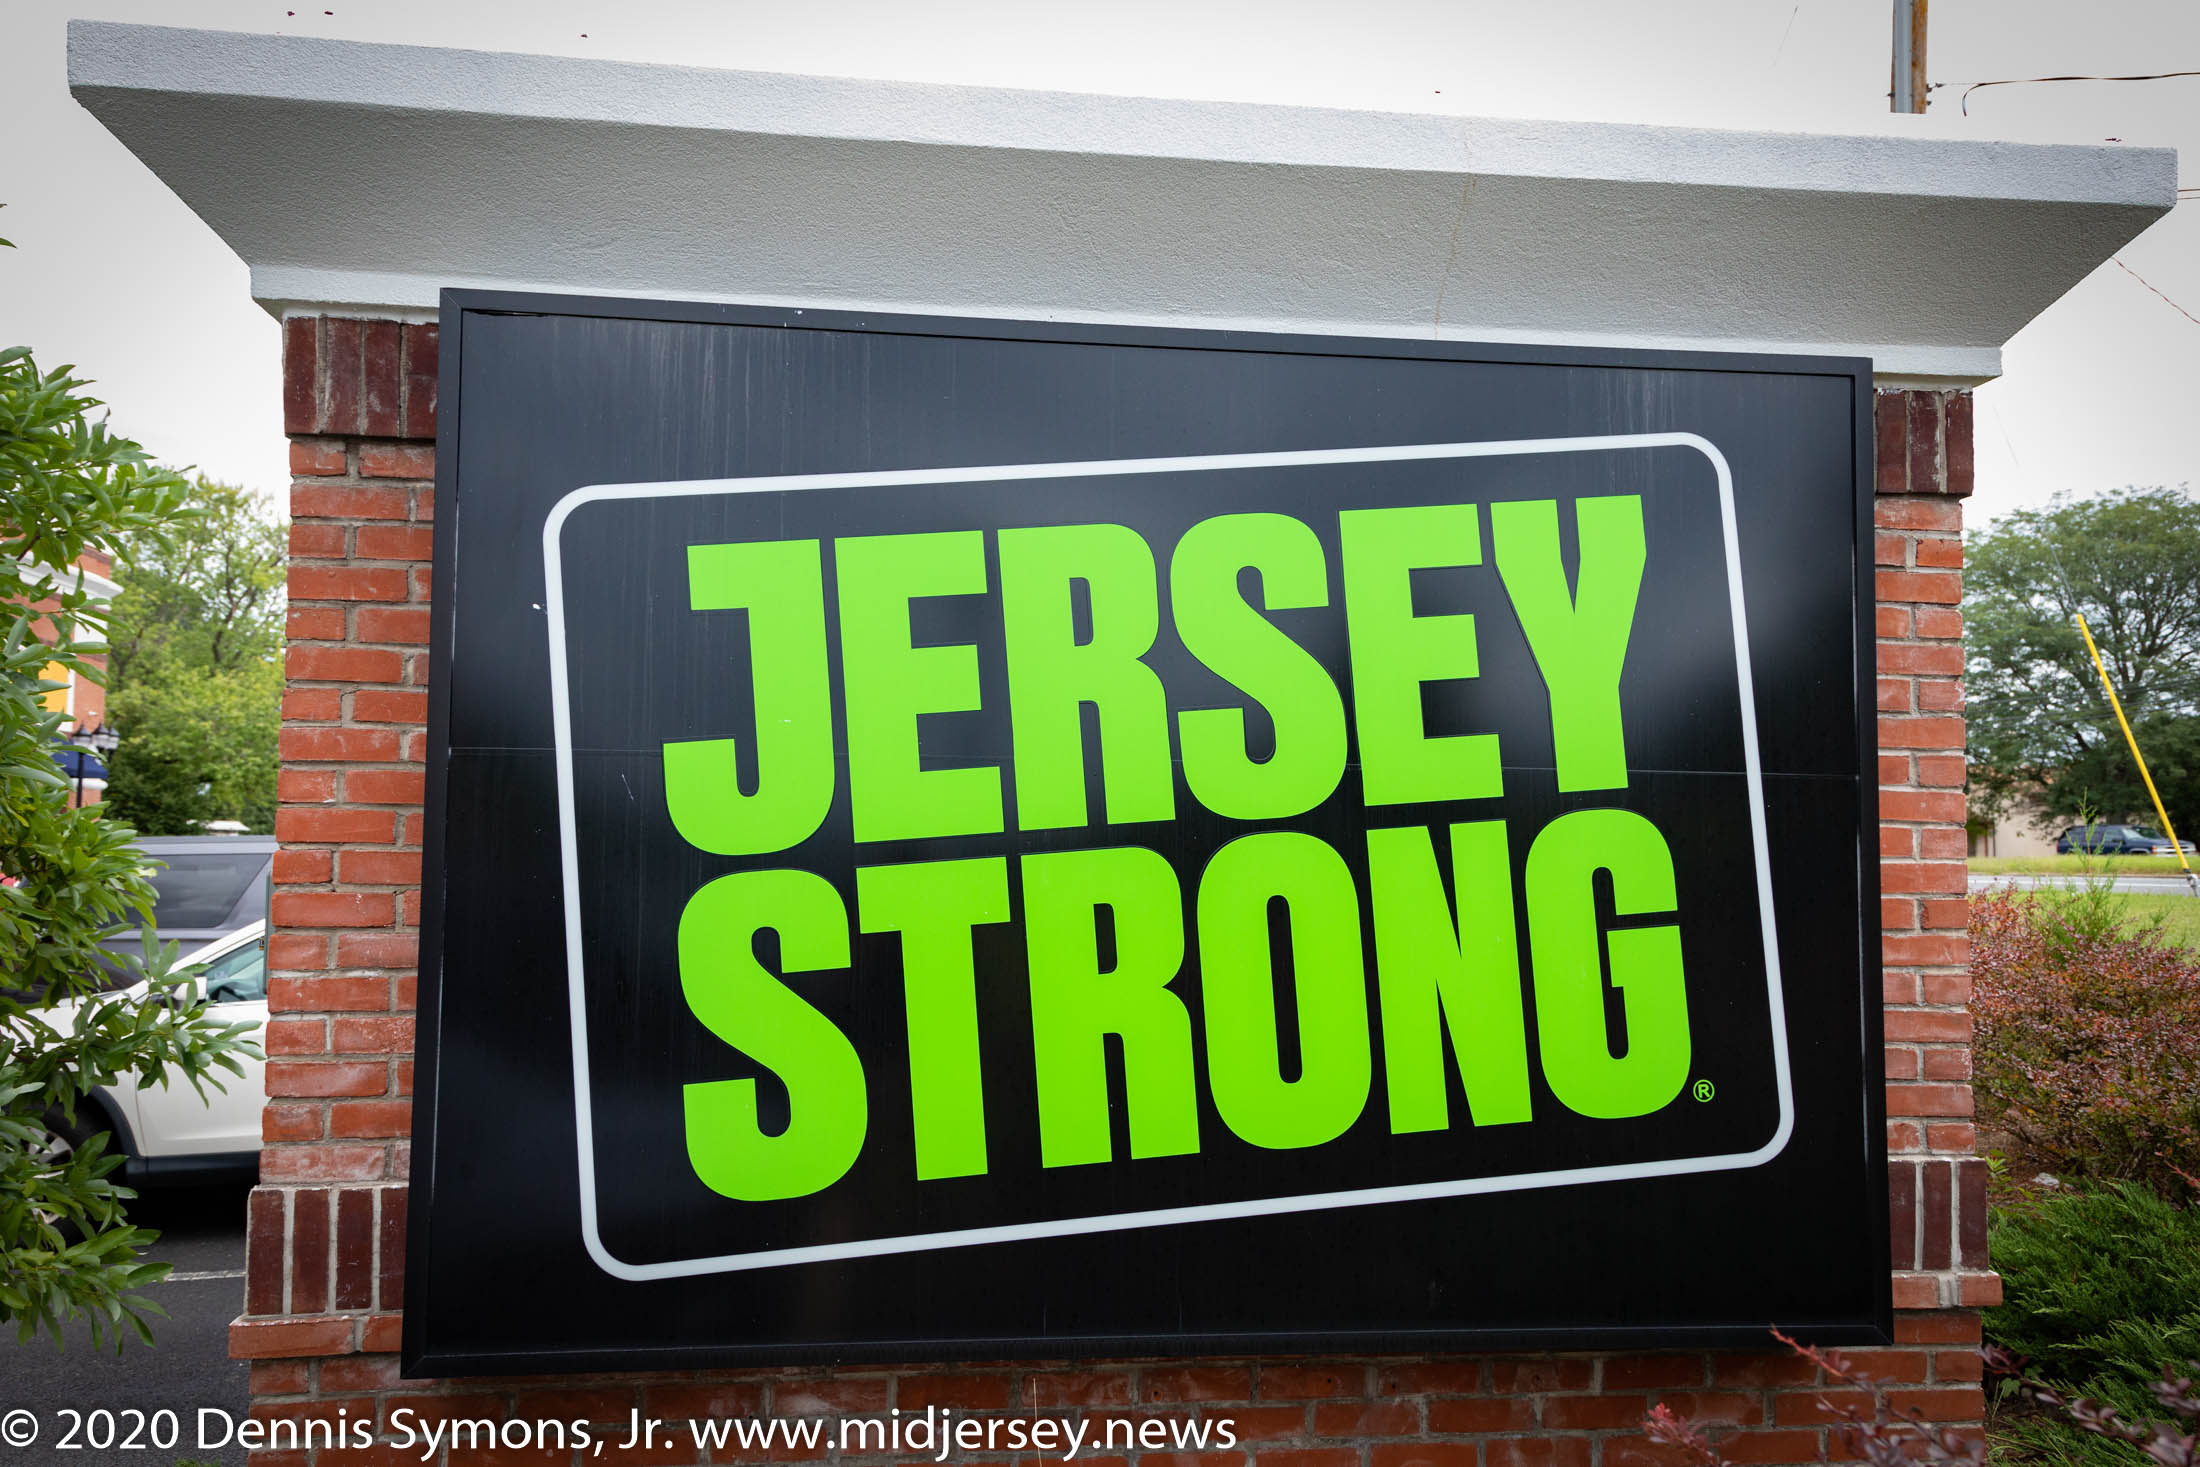 jersey strong locations near me